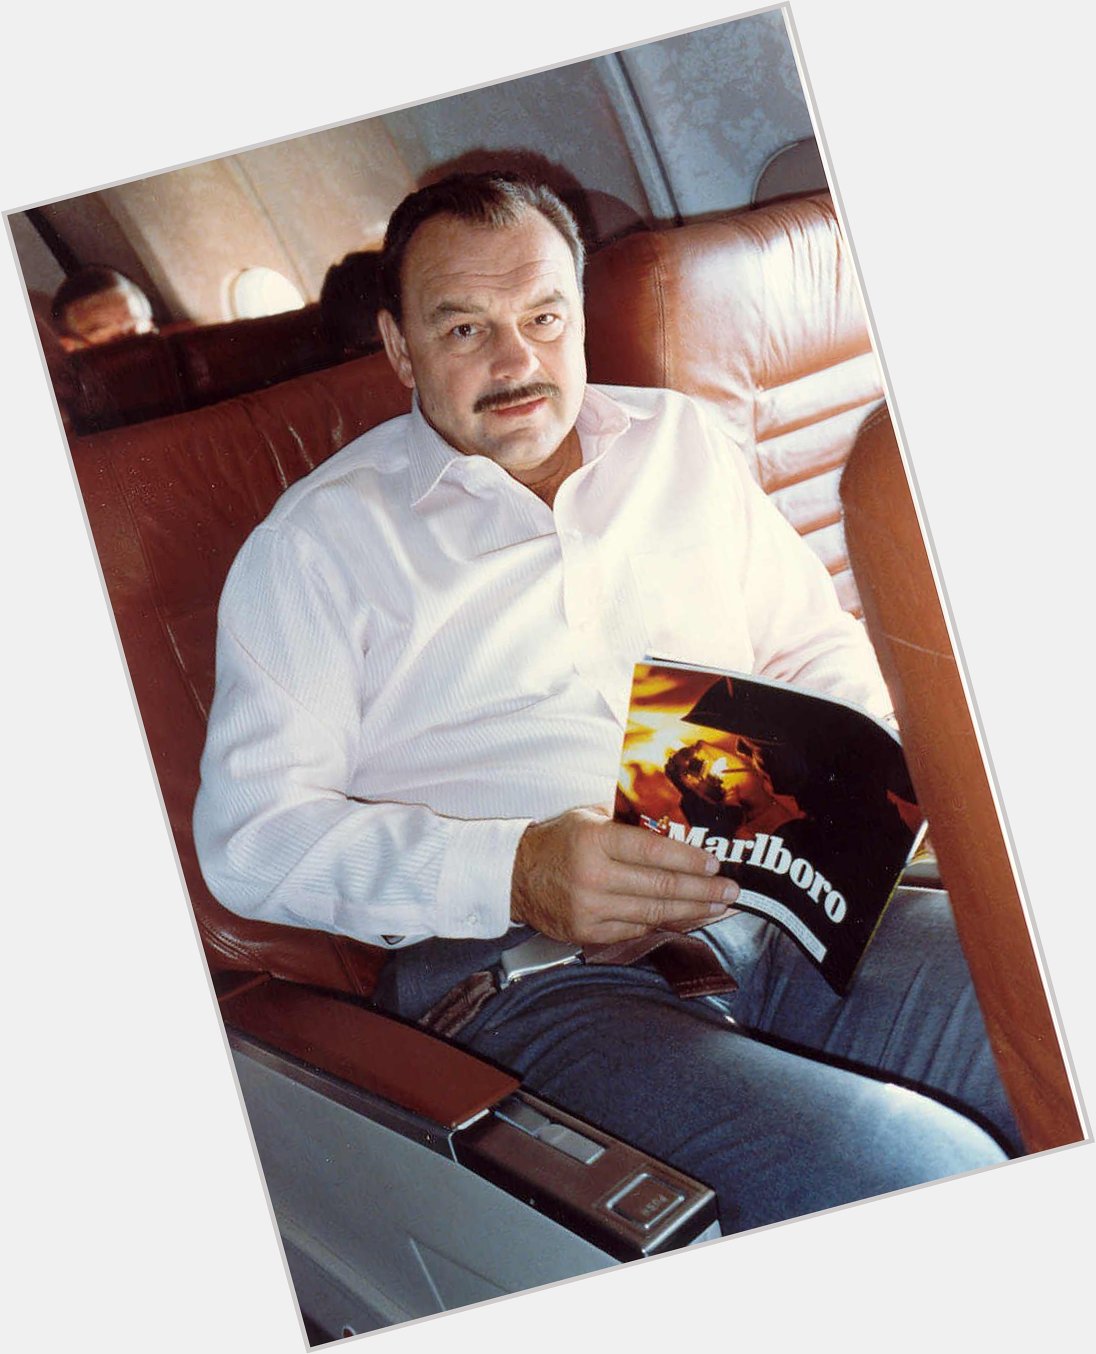 Happy Birthday to American former football player, sports commentator and actor Dick Butkus born on December 9, 1942 